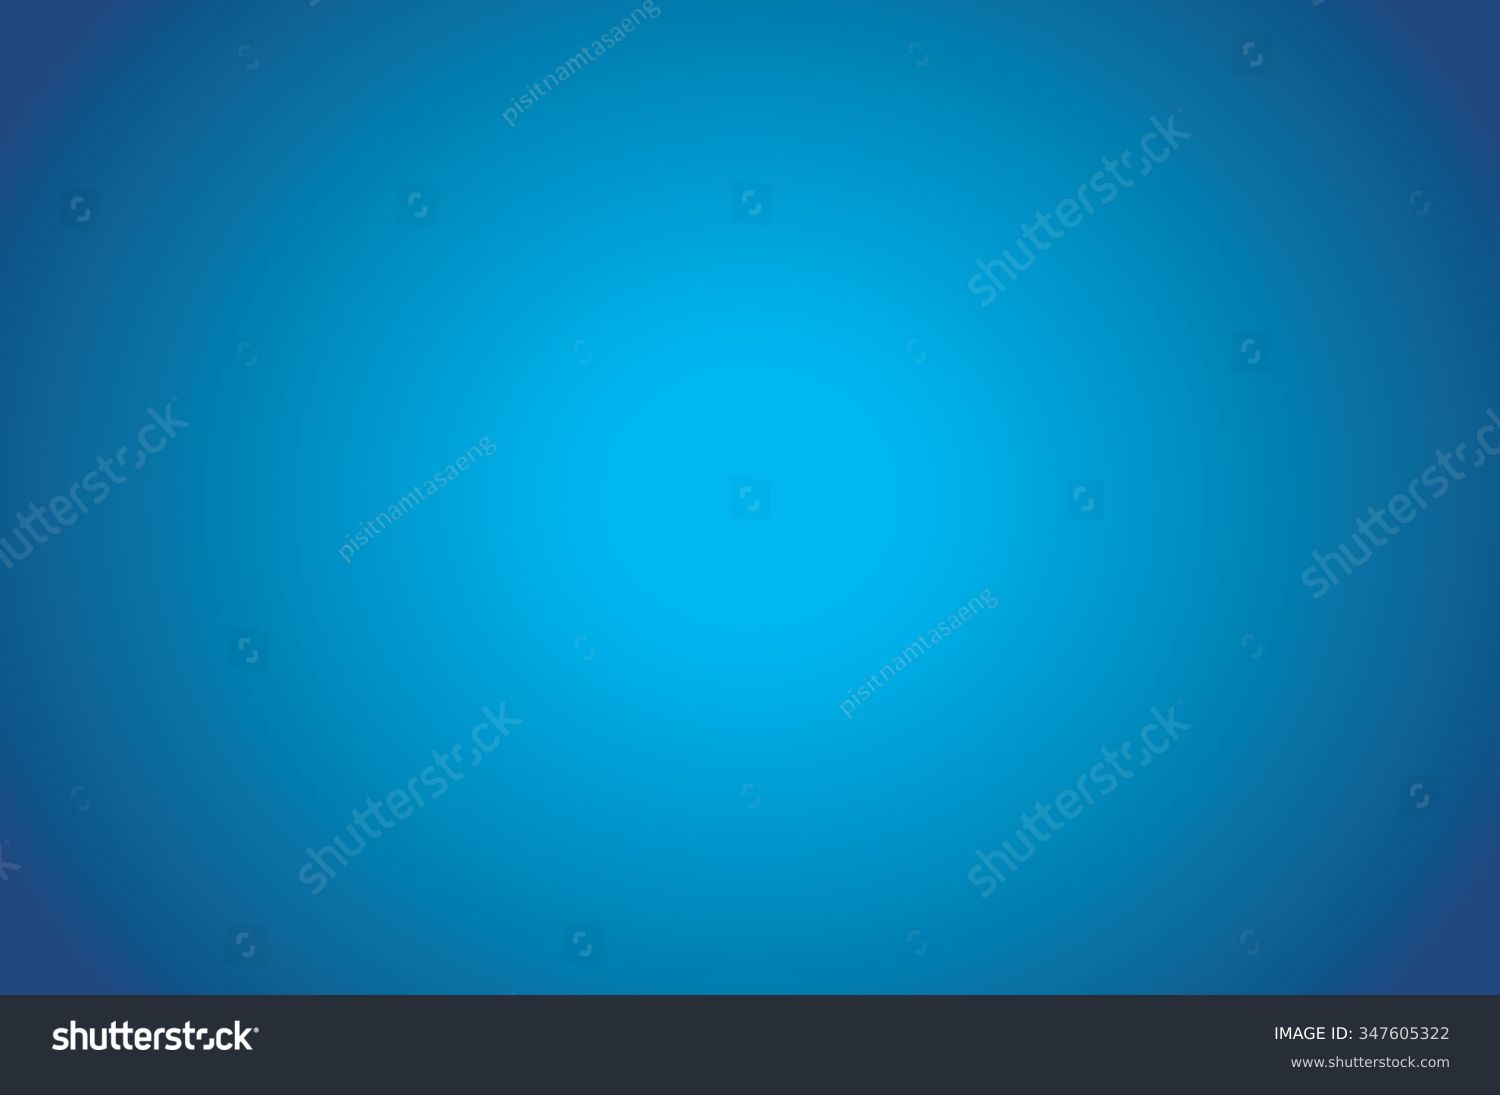 Gradient Blue abstract background #347605322